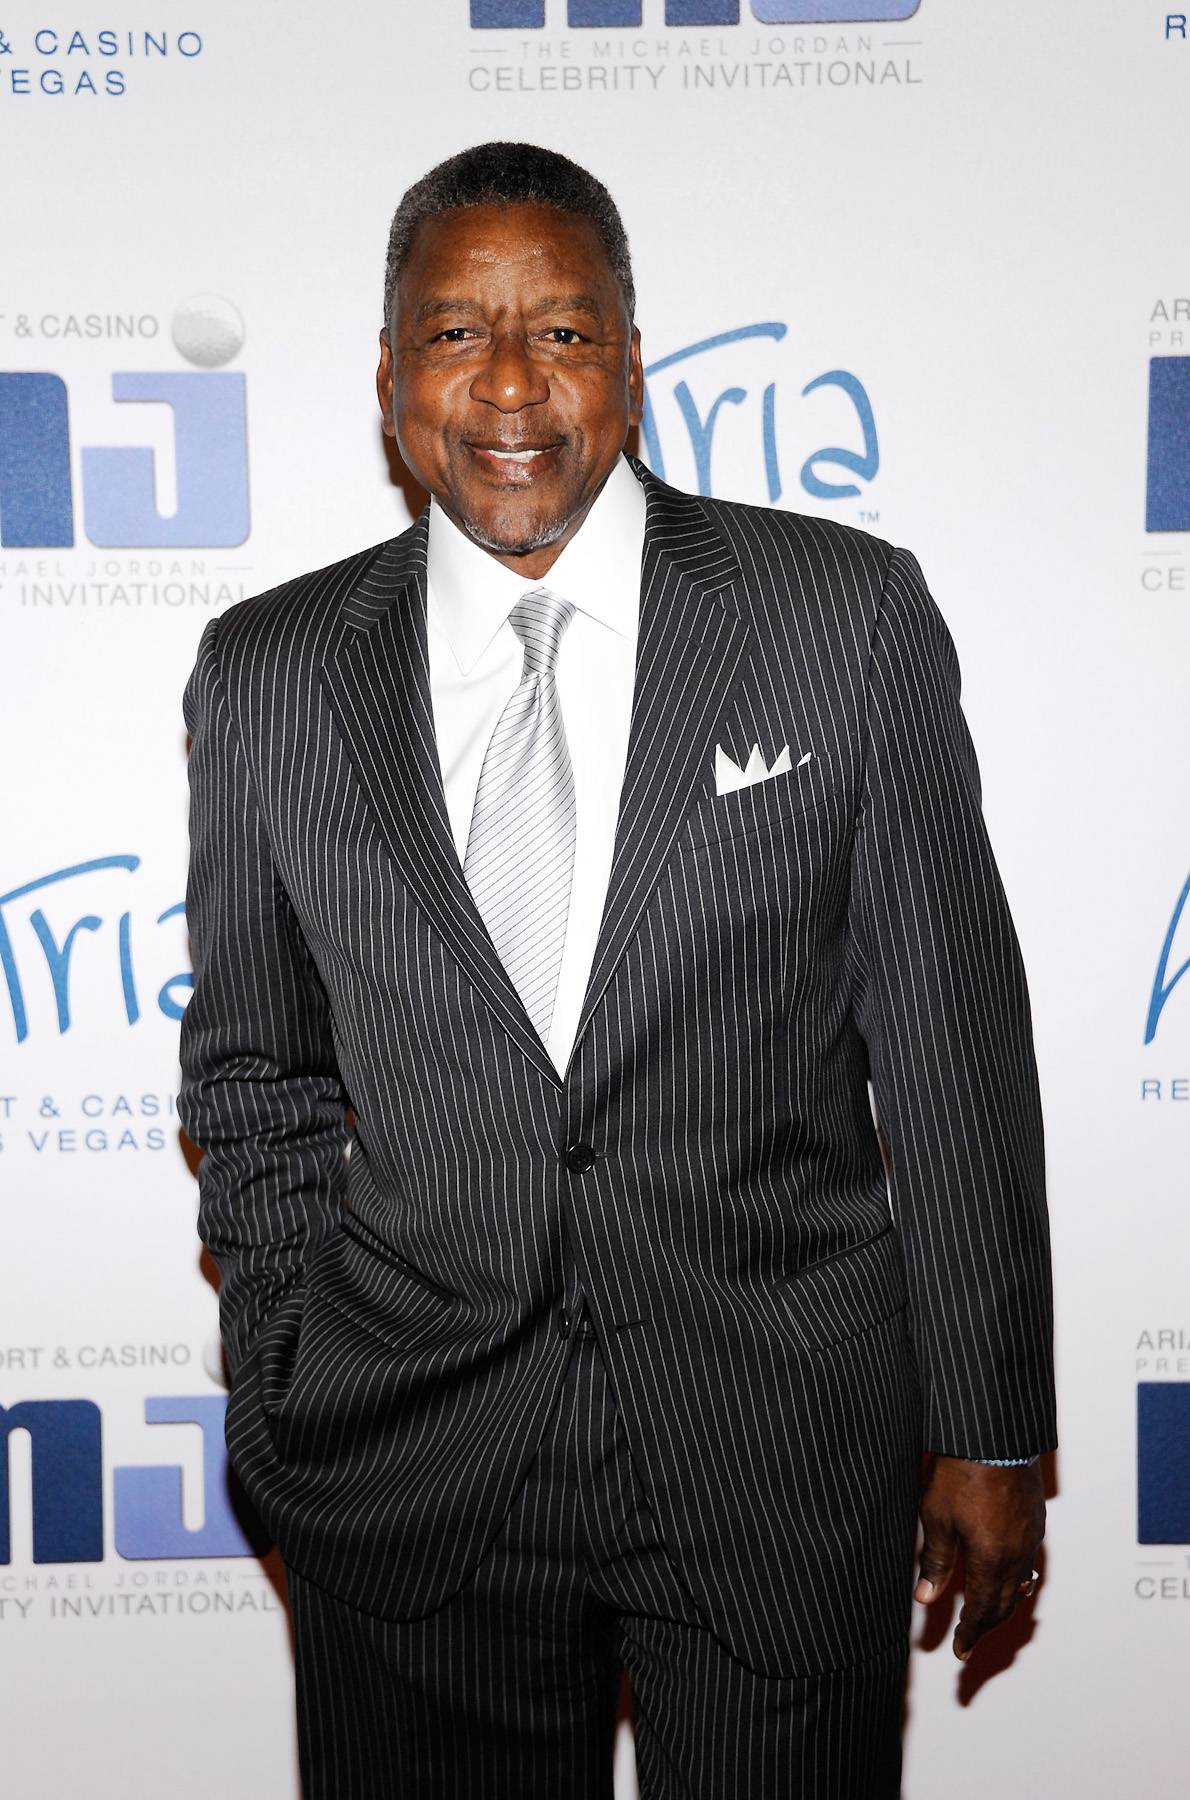 The RLJ Legacy - Over the span of his career, BET founder and the nation’s first African-American billionaire Robert Johnson has established himself as not only a top-earner, but also a savvy entrepreneur. BET hit the air in 1980 and after twenty years of building the network, Johnson sold BET to Viacom for approximately $3 billion in 2001.With his latest acquisition of two media companies, BET.com takes a look at the many business projects of its progenitor. — Naeesa Aziz&nbsp;&nbsp;&nbsp;(Photo: Ethan Miller/Getty Images)